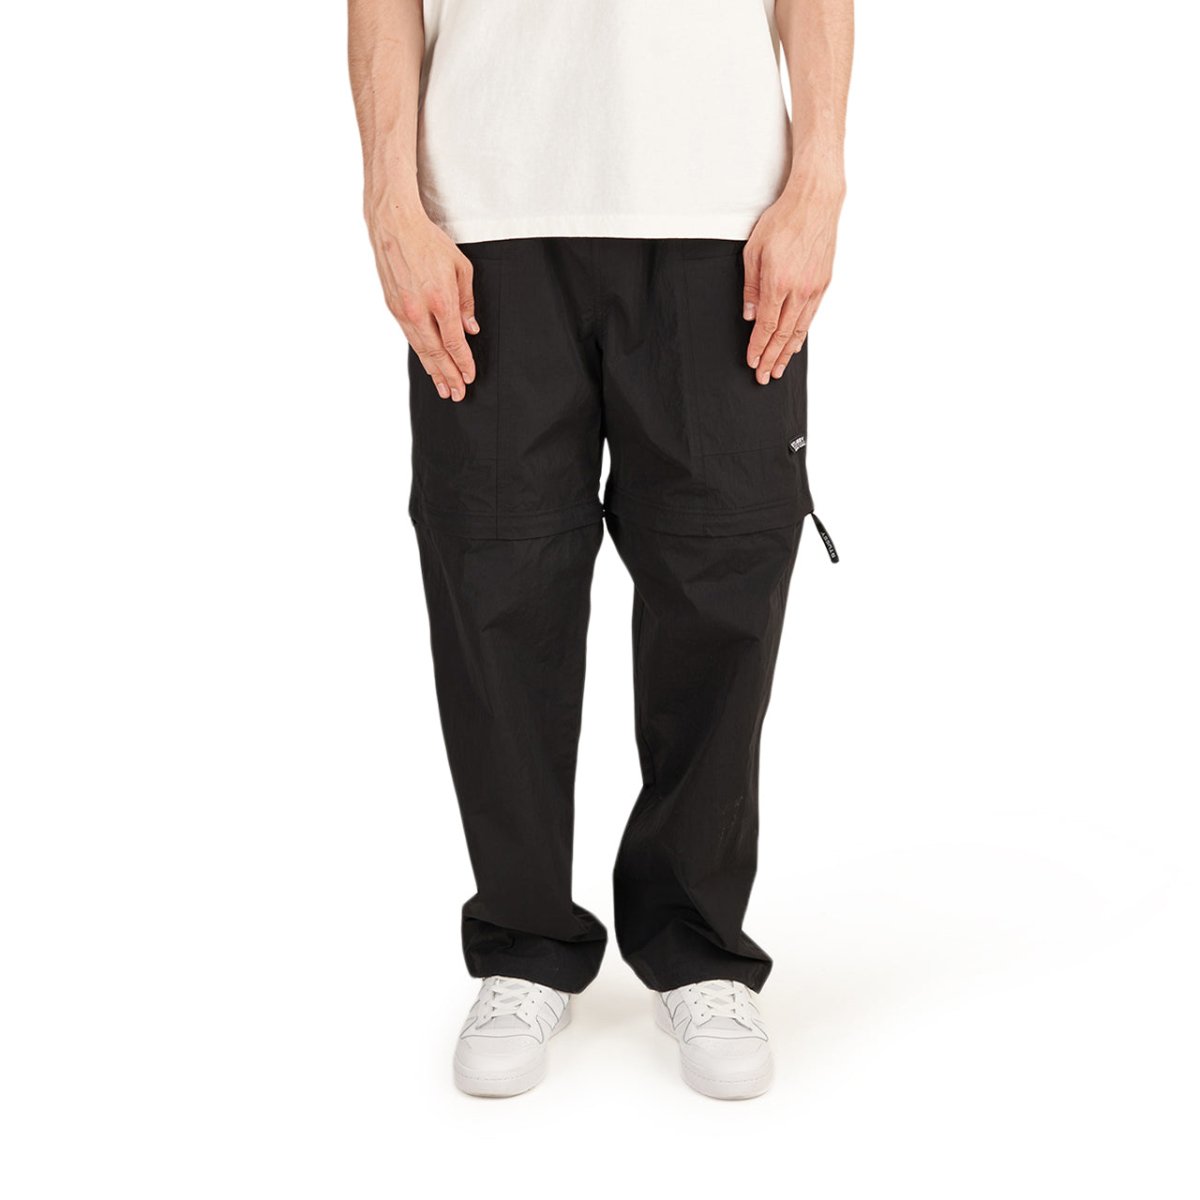 Stüssy Nyco Convertible Pant (Schwarz)  - Allike Store